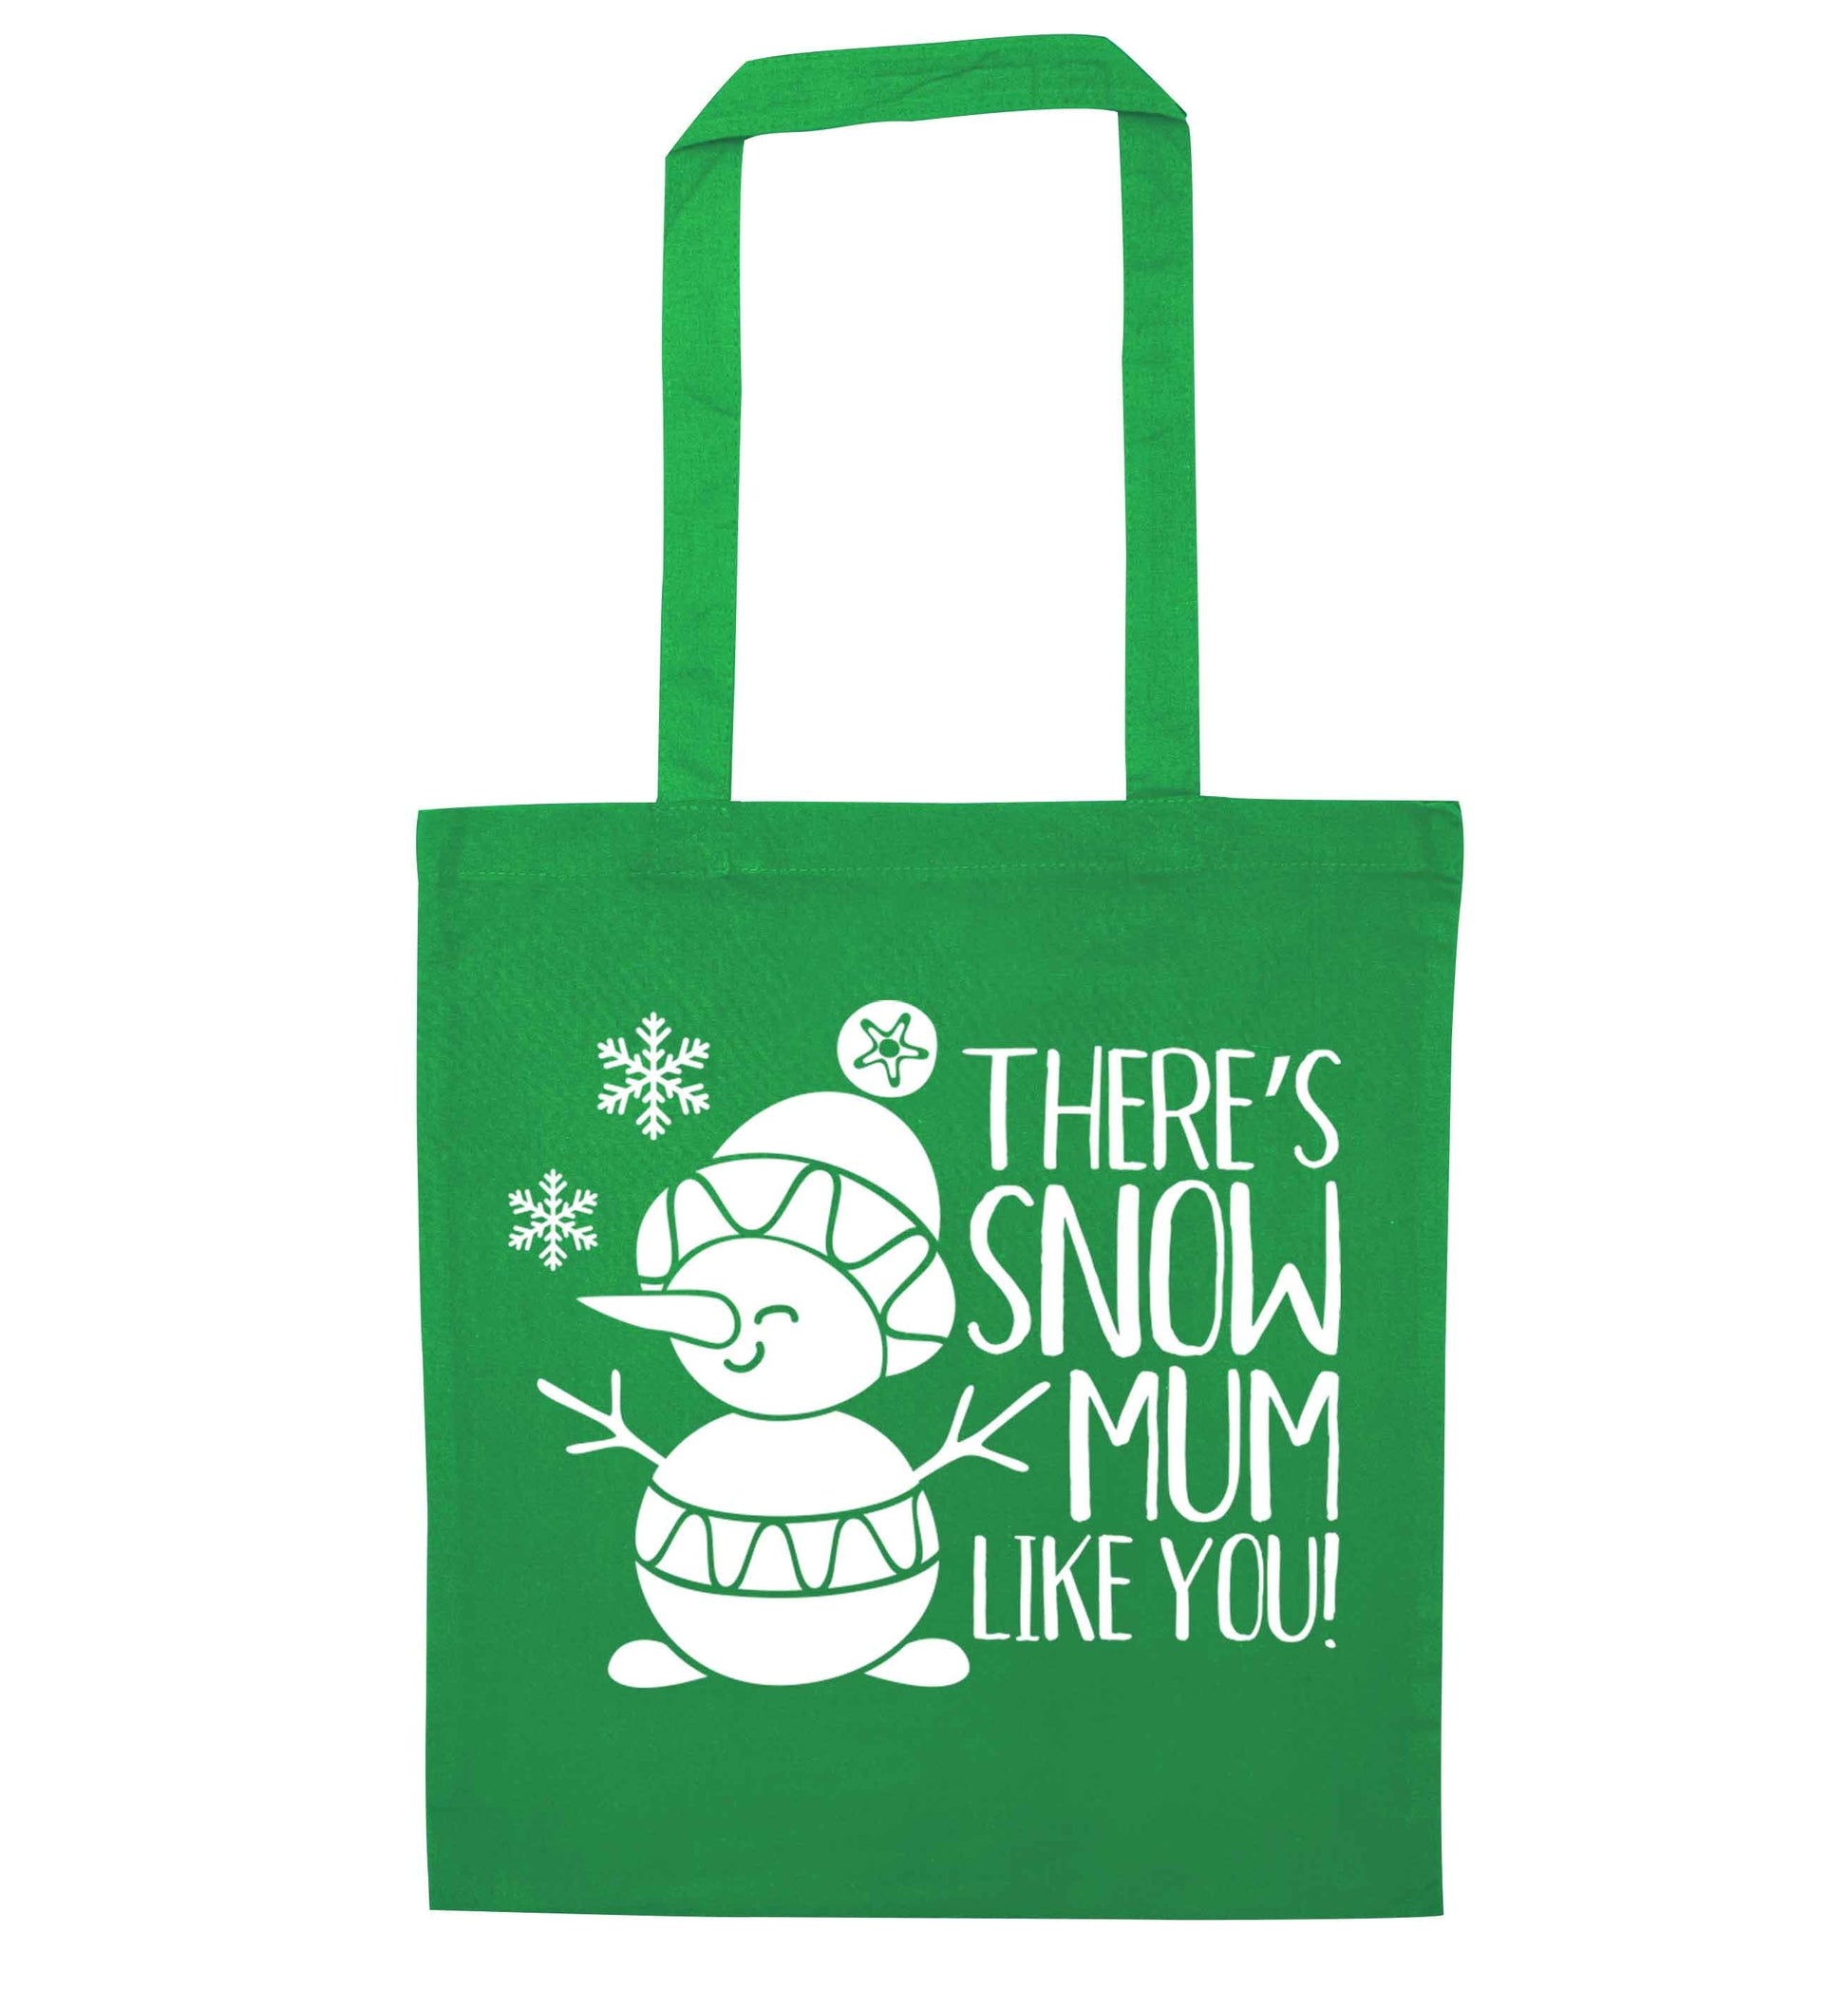 There's snow mum like you green tote bag